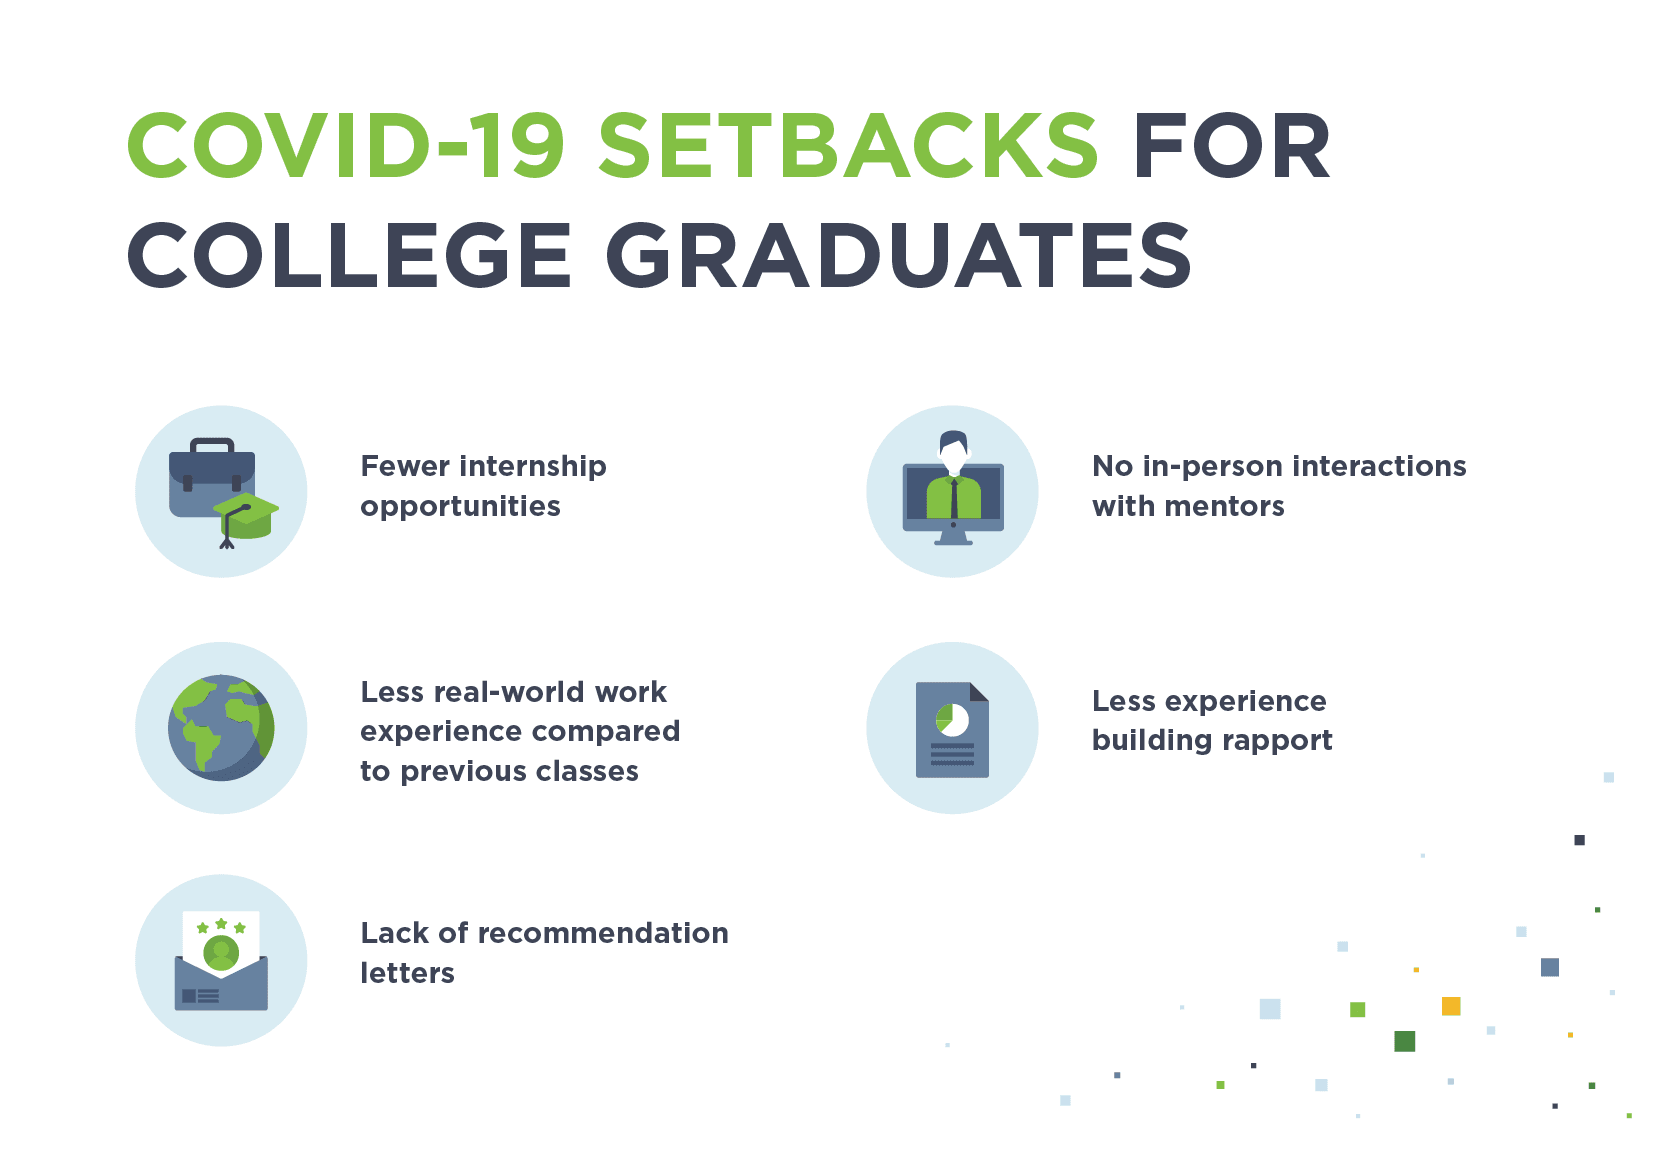 College grads in 2021 faced setbacks due to Covid-19.